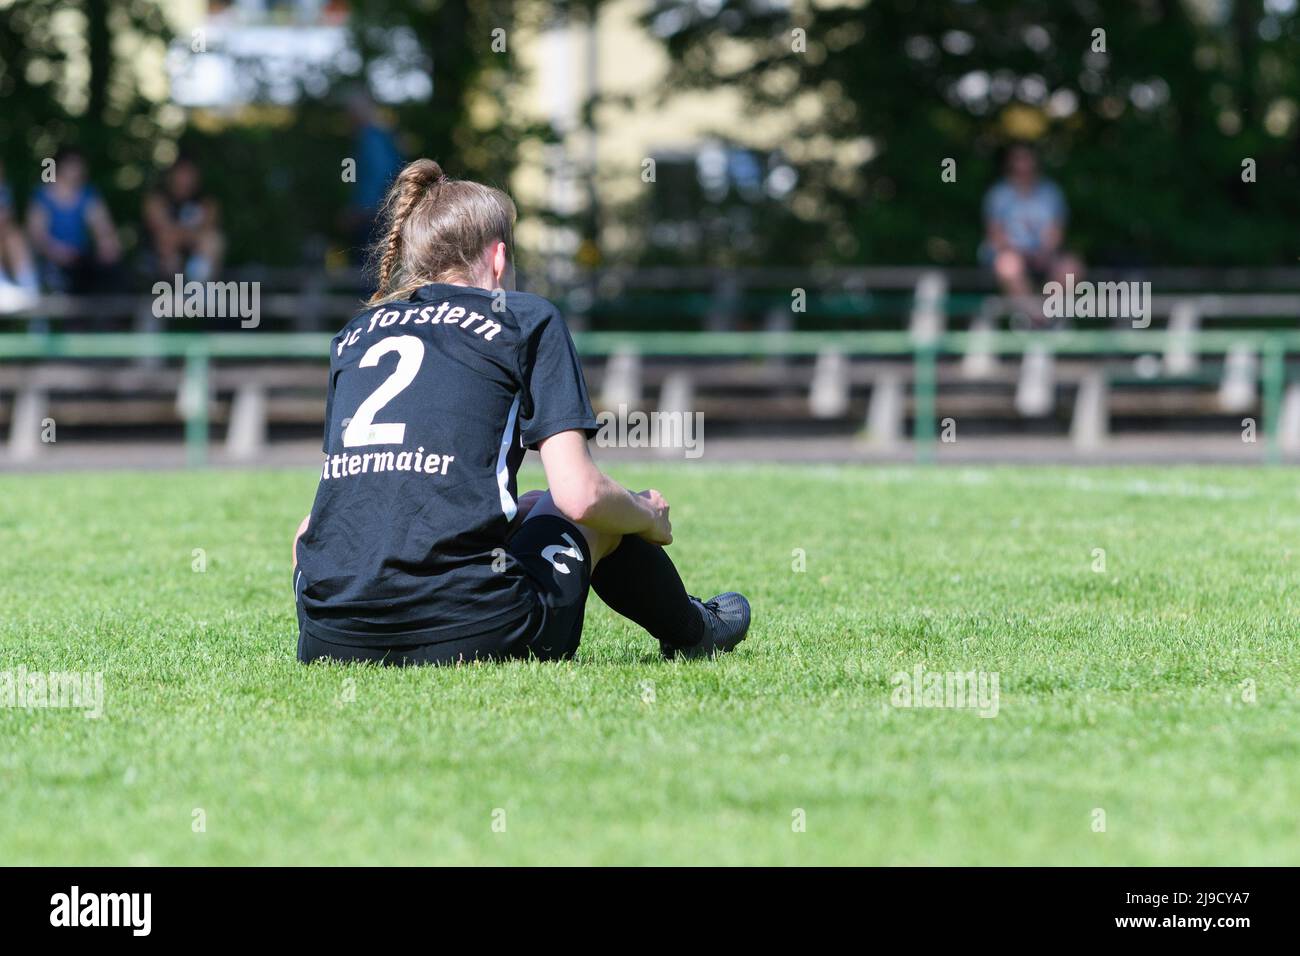 Munich, Germany. 22nd May, 2022. Martina Mittermaier (2 FC Forstern) after the final whistle and being relegated after the Regionalliga Sued match between FFC Wacker Muenchen and FC Forstern at Bezirkssportanlage Untersendling, Munich. Sven Beyrich/SPP Credit: SPP Sport Press Photo. /Alamy Live News Stock Photo